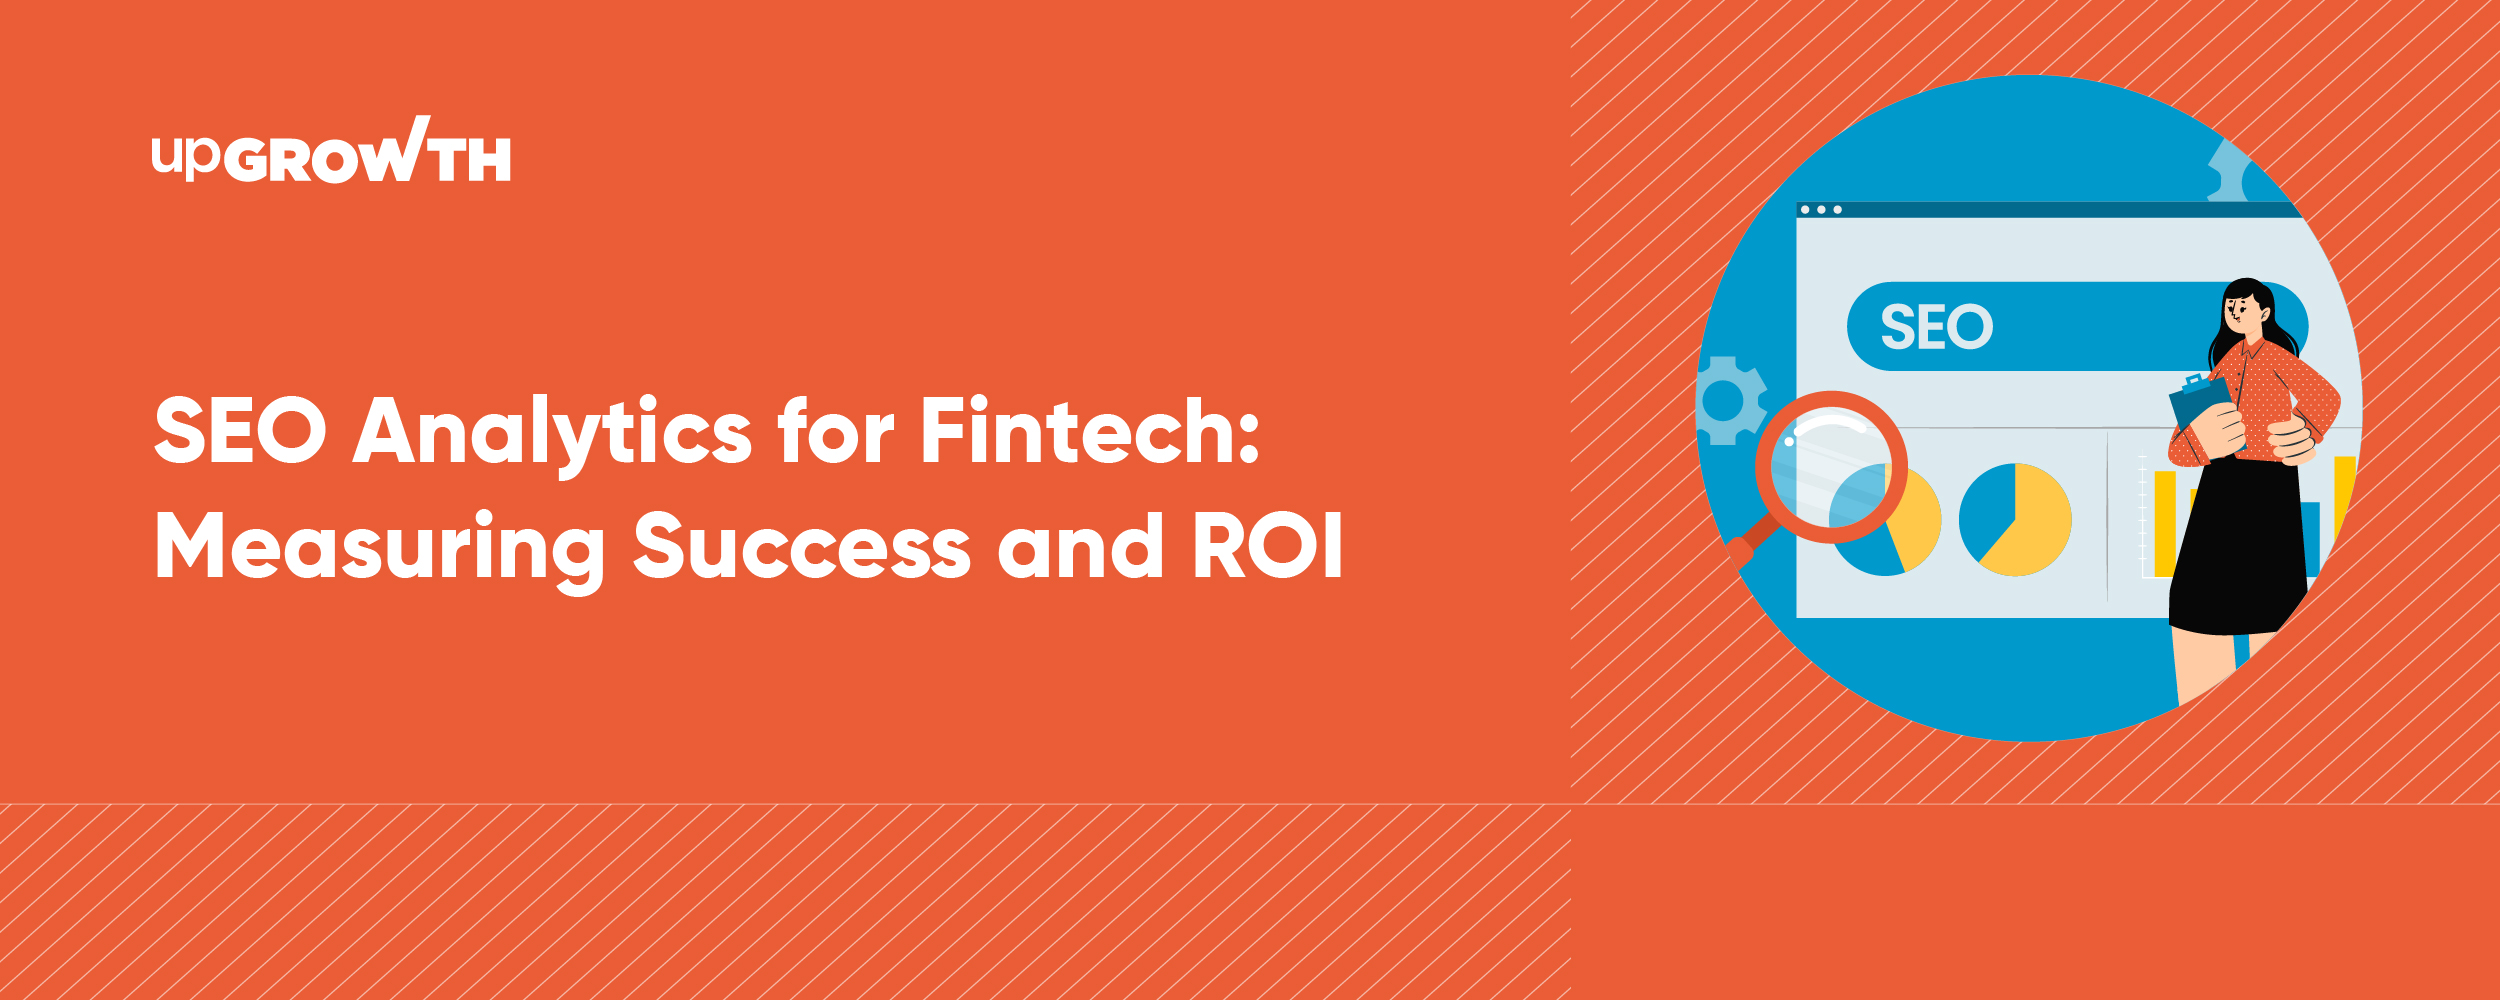 SEO Analytics for Fintech Measuring Success and ROI